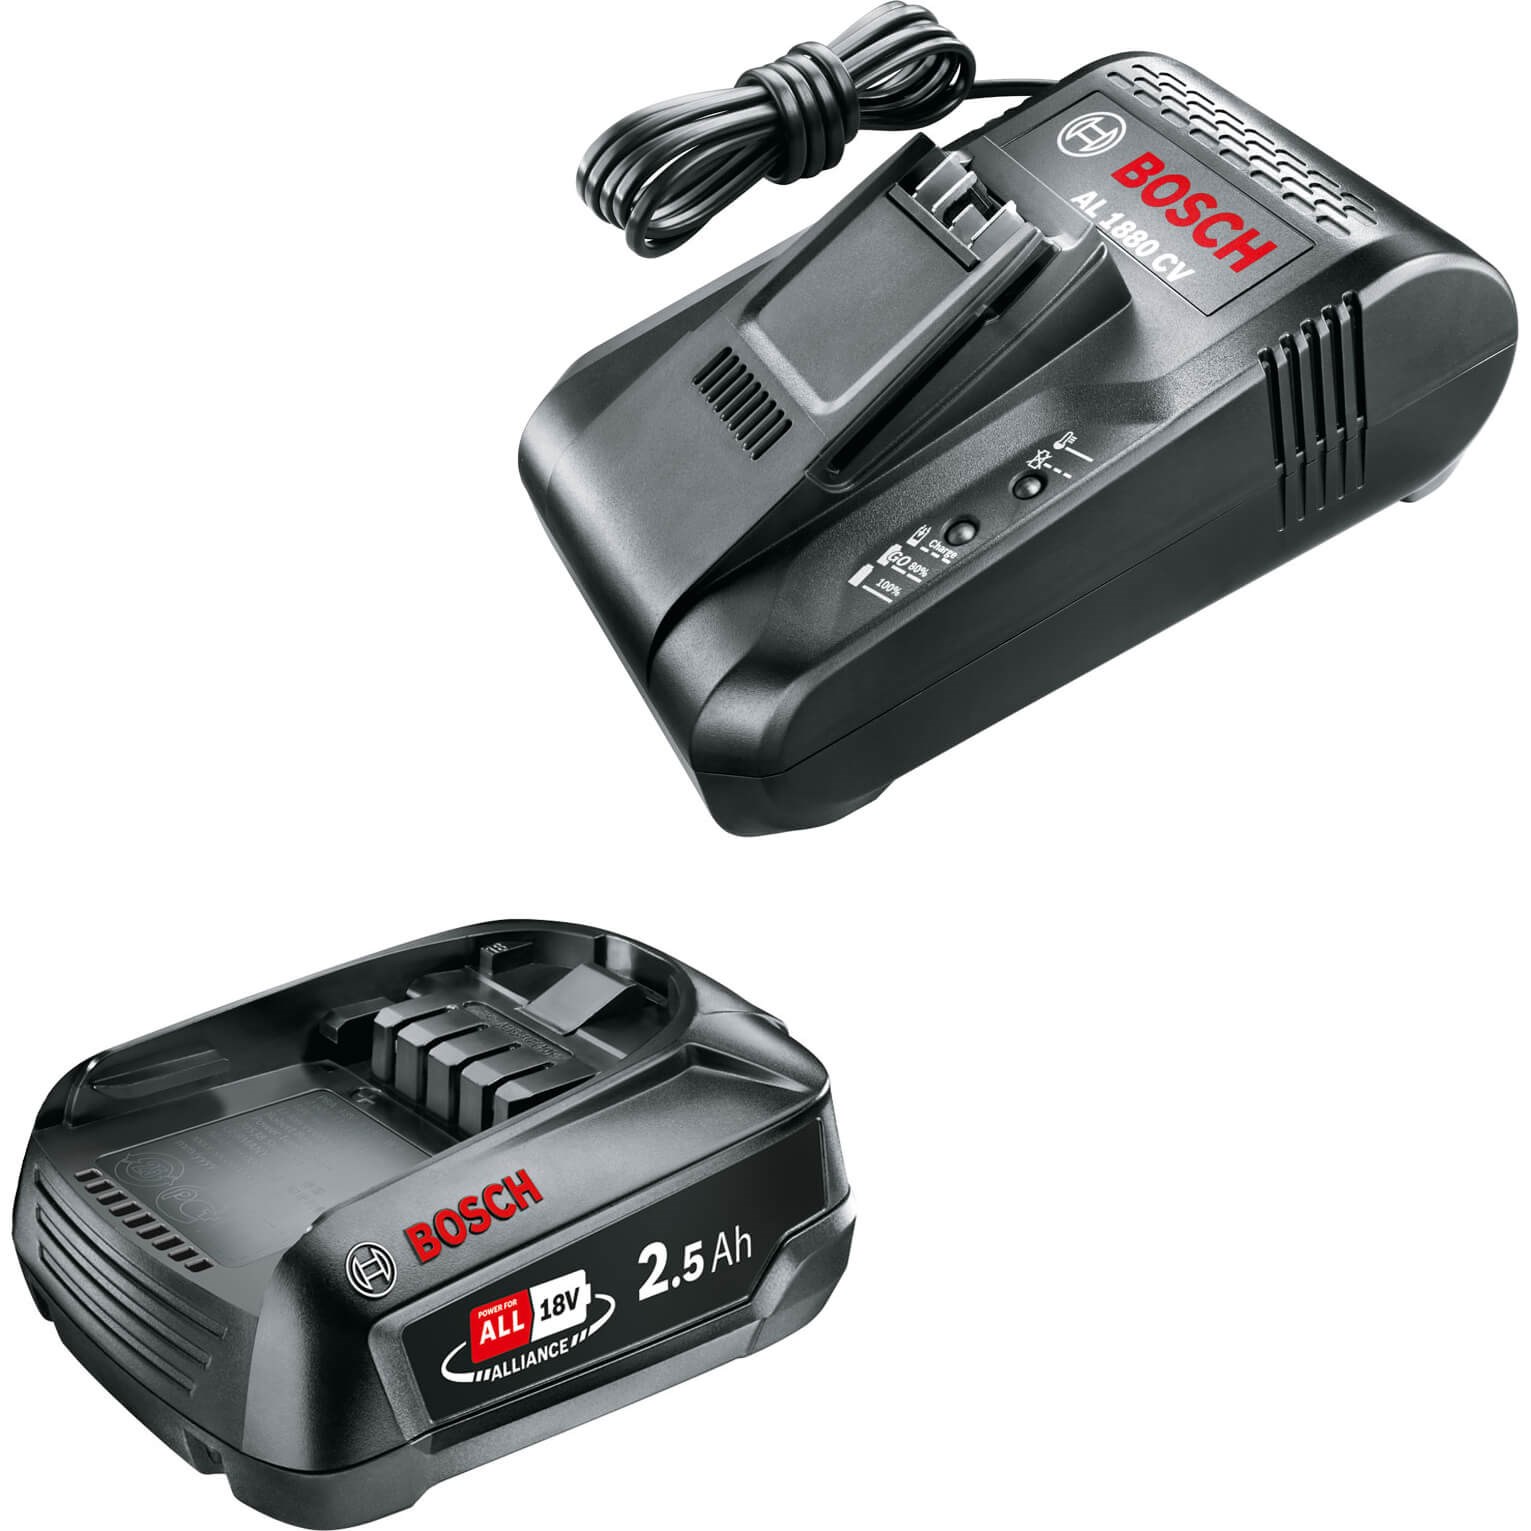 Bosch Genuine GREEN 18v Cordless Li-ion Battery 2.5ah and 8A Fast Charger